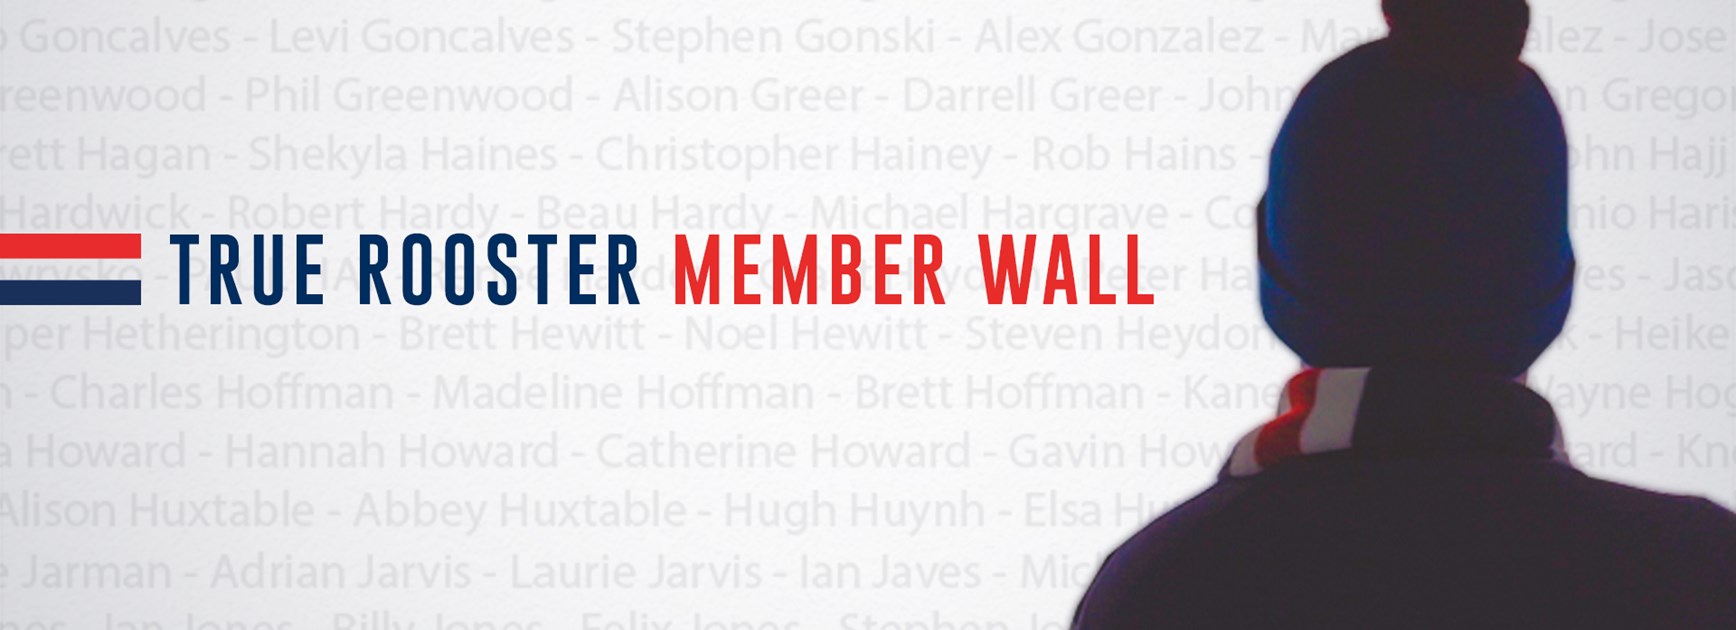 Last Chance to get Your Name on our Member Wall!